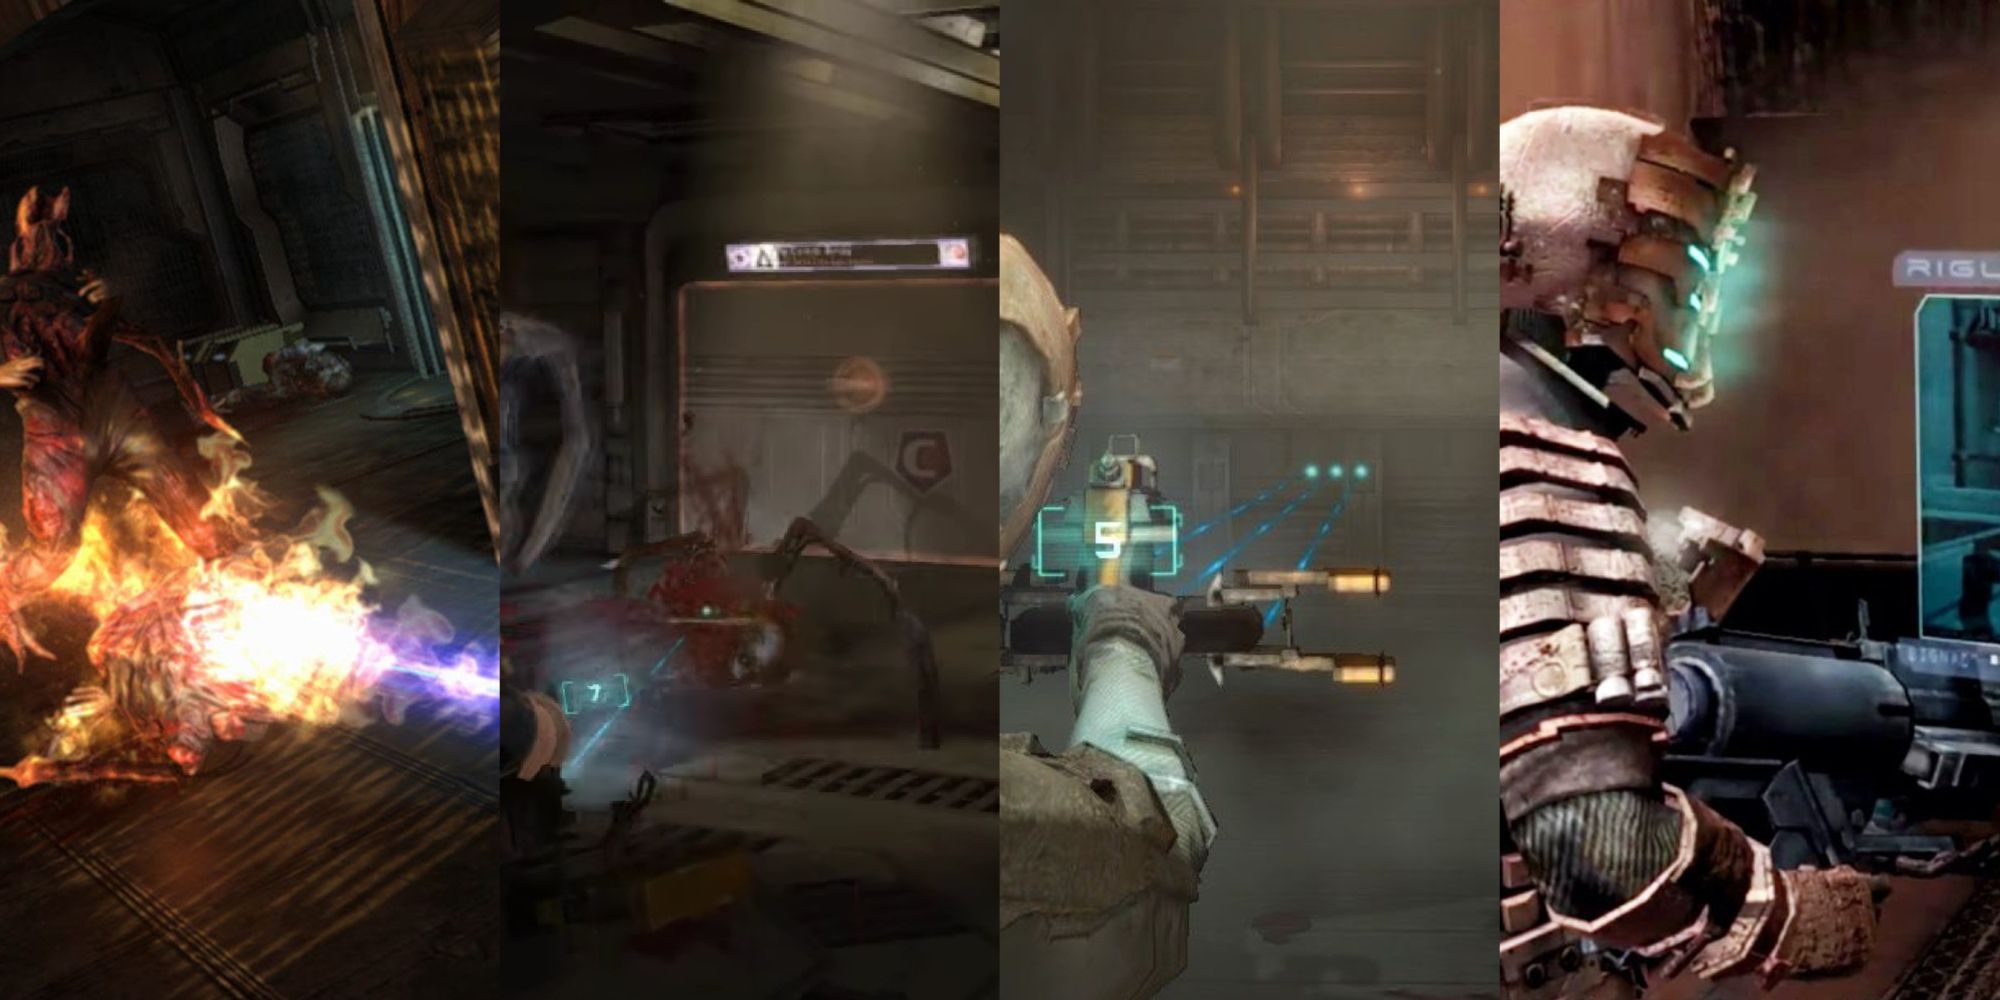 A collage of the cool variety of weapons from Dead Space, including the plasma cutter, flame thrower, ripper, and pulse rifle.